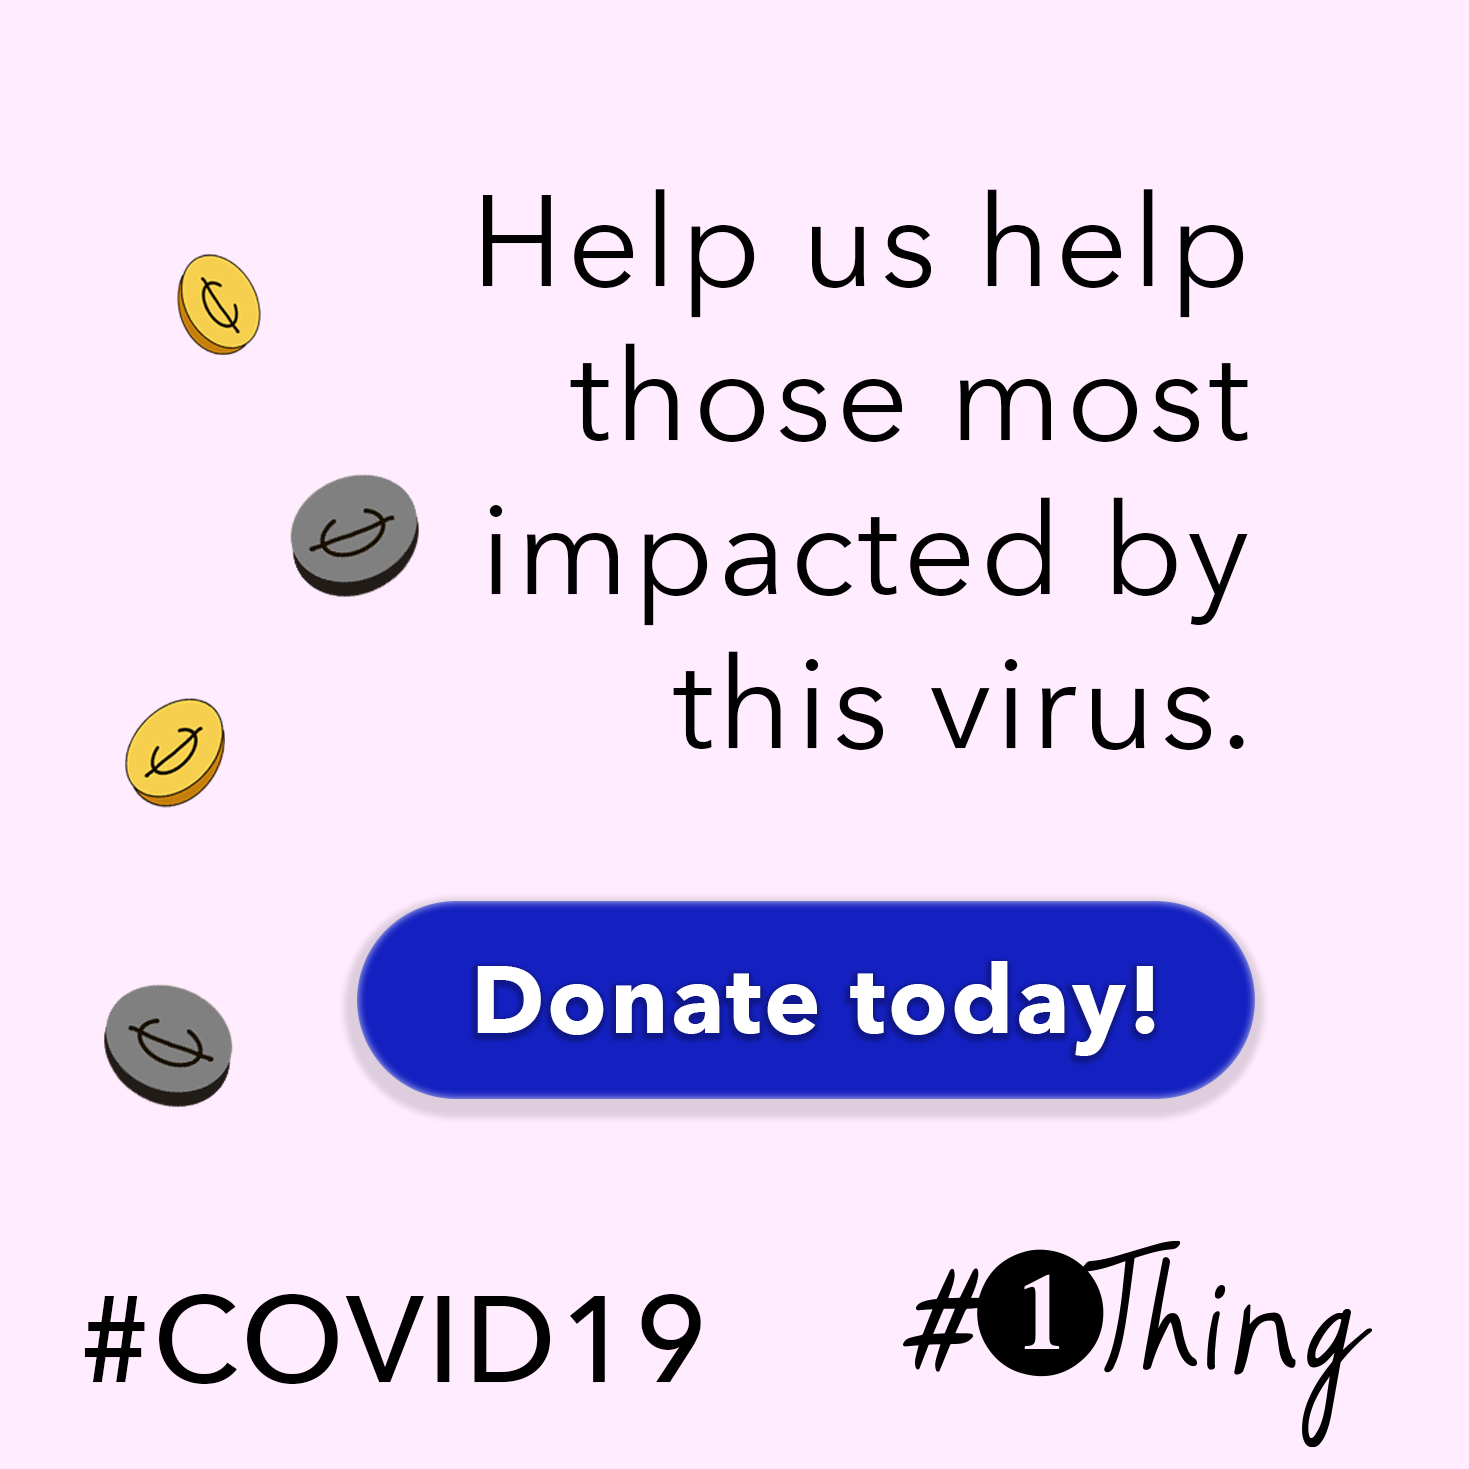 Help us help those most impacted by the virus.